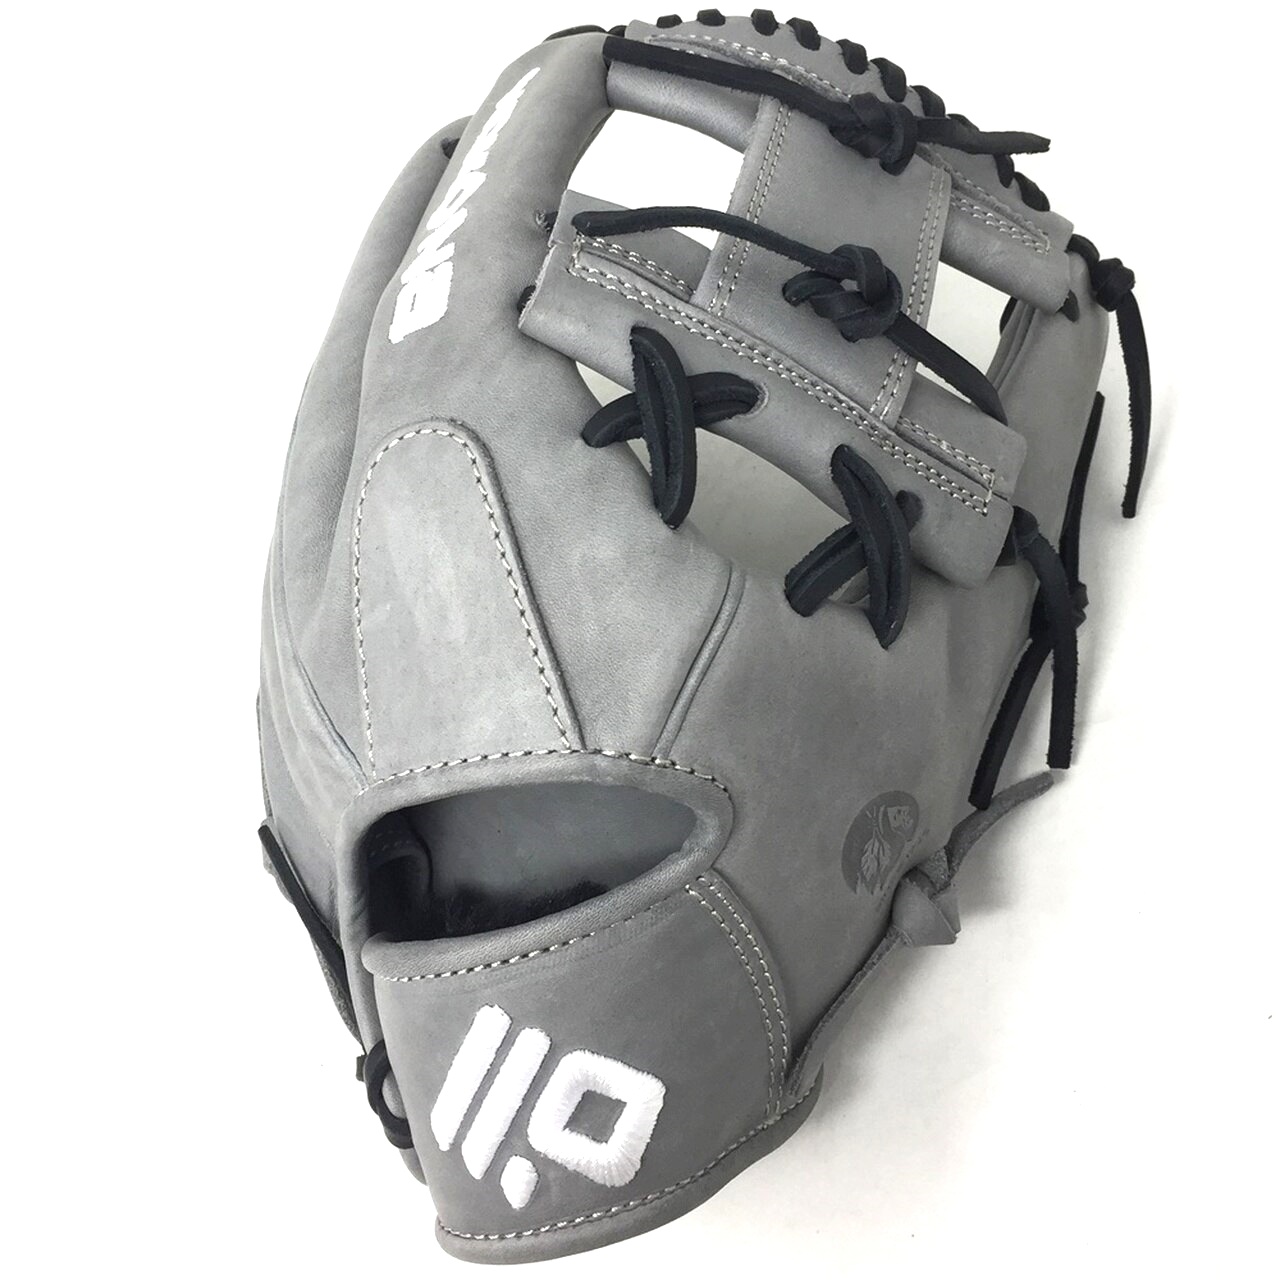 This Nokona glove is made with stiff American Kip Leather. This gloves requires a lot of breaking in, but will last forever. The 200 pattern from Nokona is designed with smaller hand opening for younger players wanting to use a high quality glove. Players with smaller hands like younger players under 14 years of age prefer this pattern. The American Kip series, made with the finest American steer hide, tanned to create a leather with similar characteristics to Japanese and European kip leather, making a light weight and highly structured glove. This series is offered in four modern colors - white, black, blonde, and gray - This glove is stiff and designed for 14 and under player with smaller hand opening.